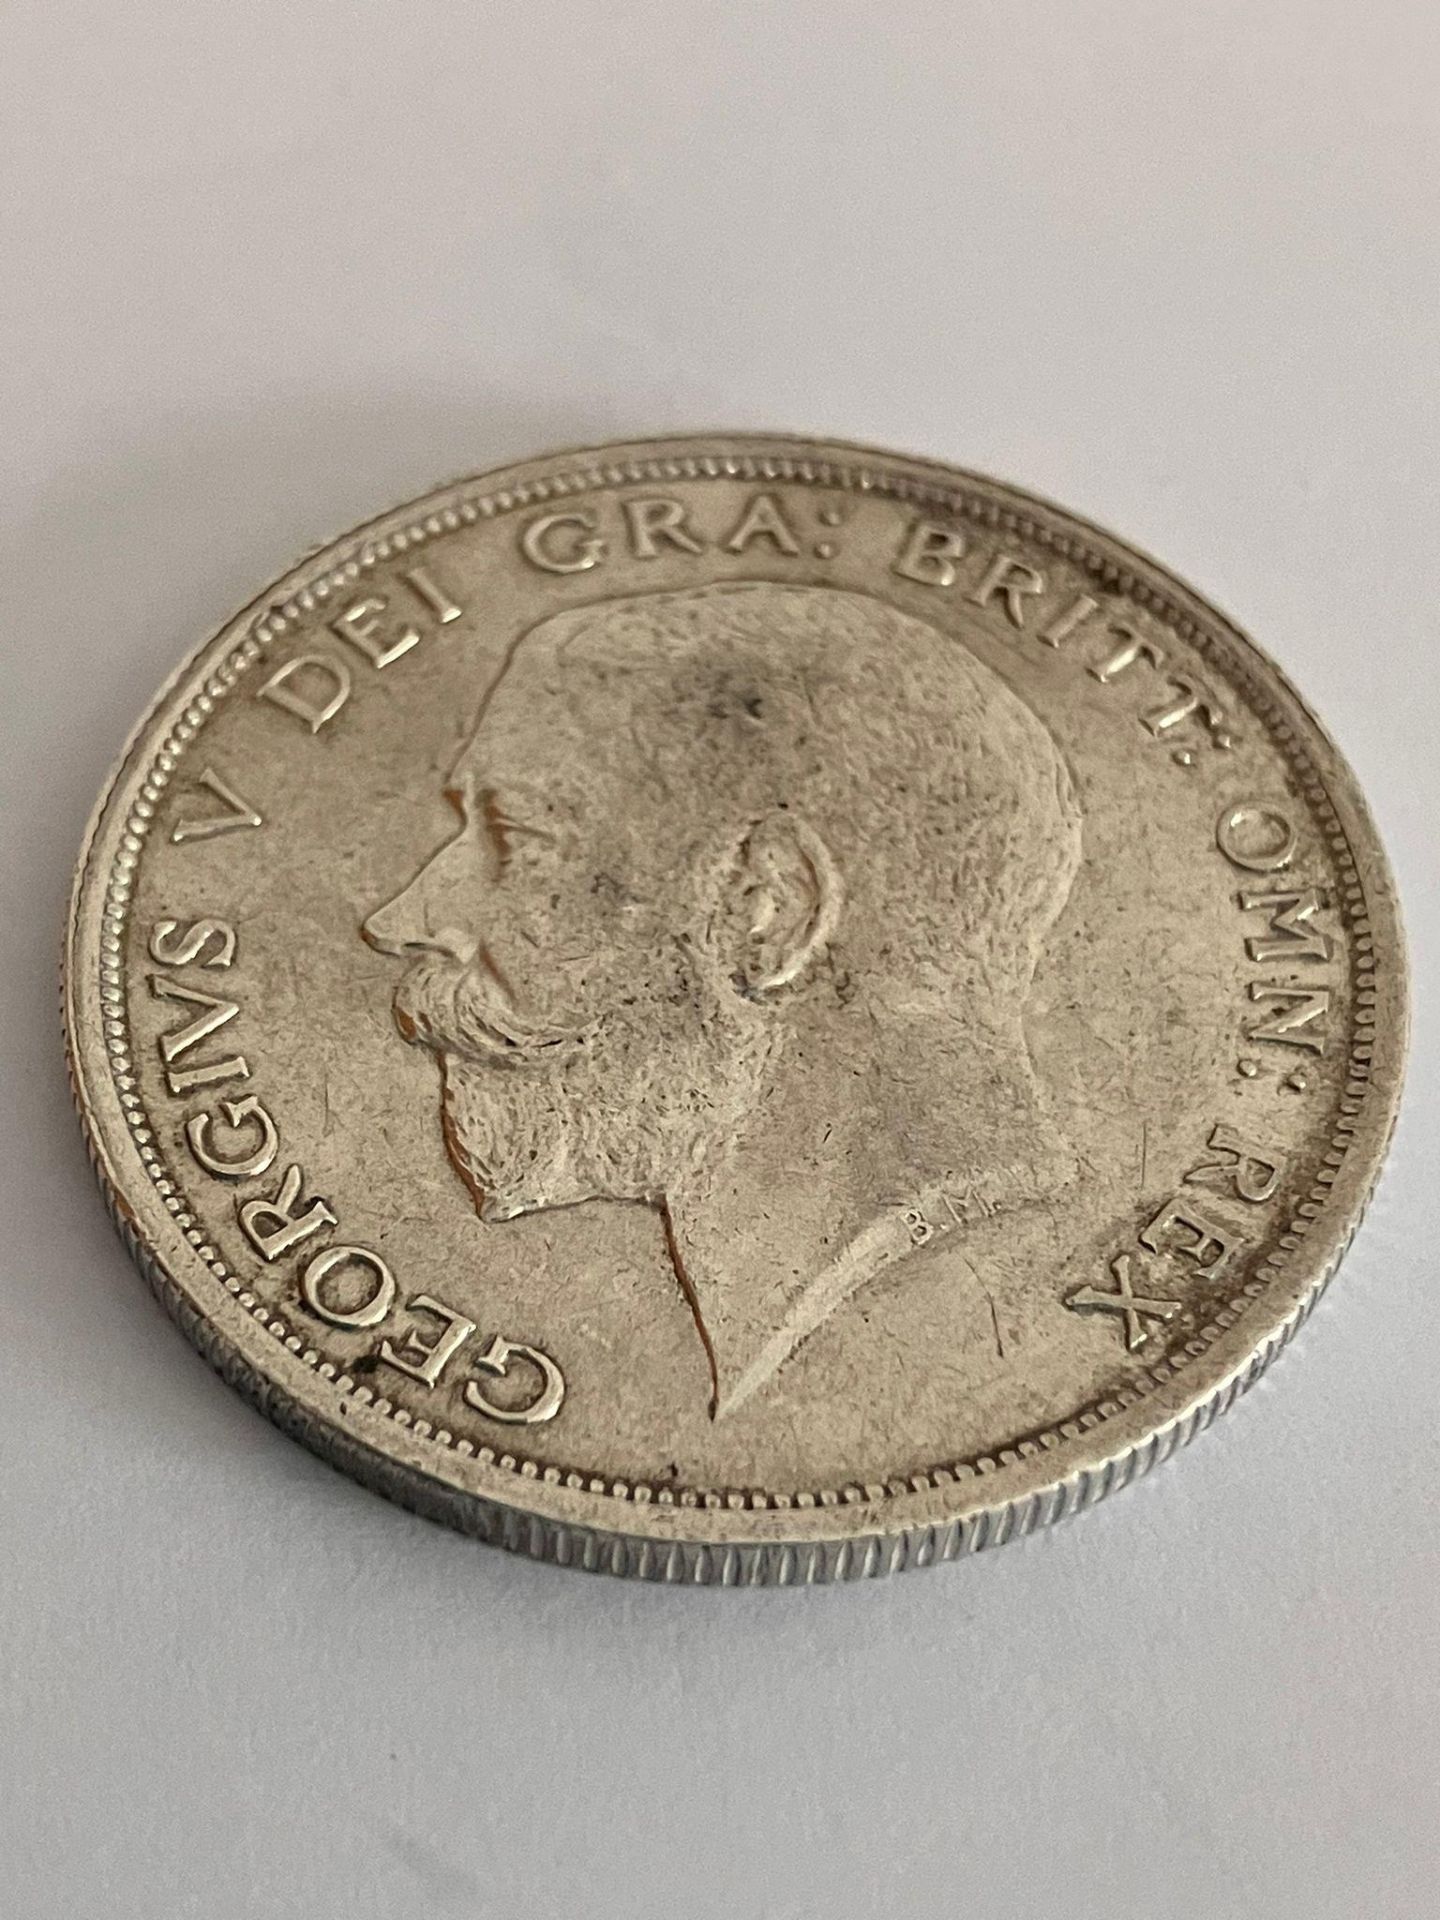 1916 SILVER HALF CROWN in Extra fine condition. Please see pictures. - Image 2 of 2